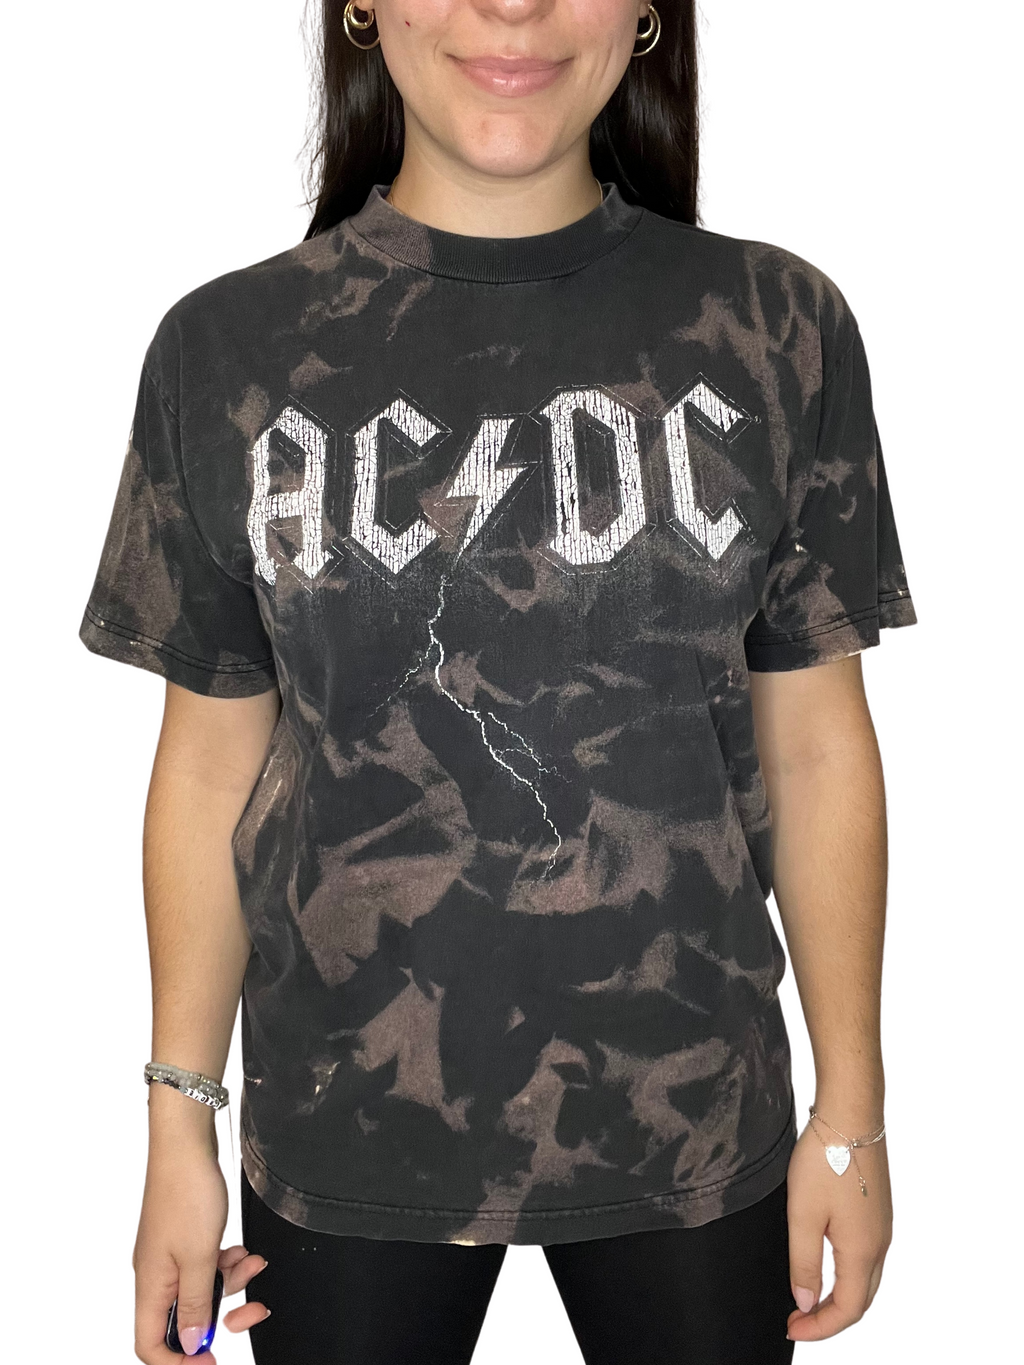 ACDC Bleached Shirt